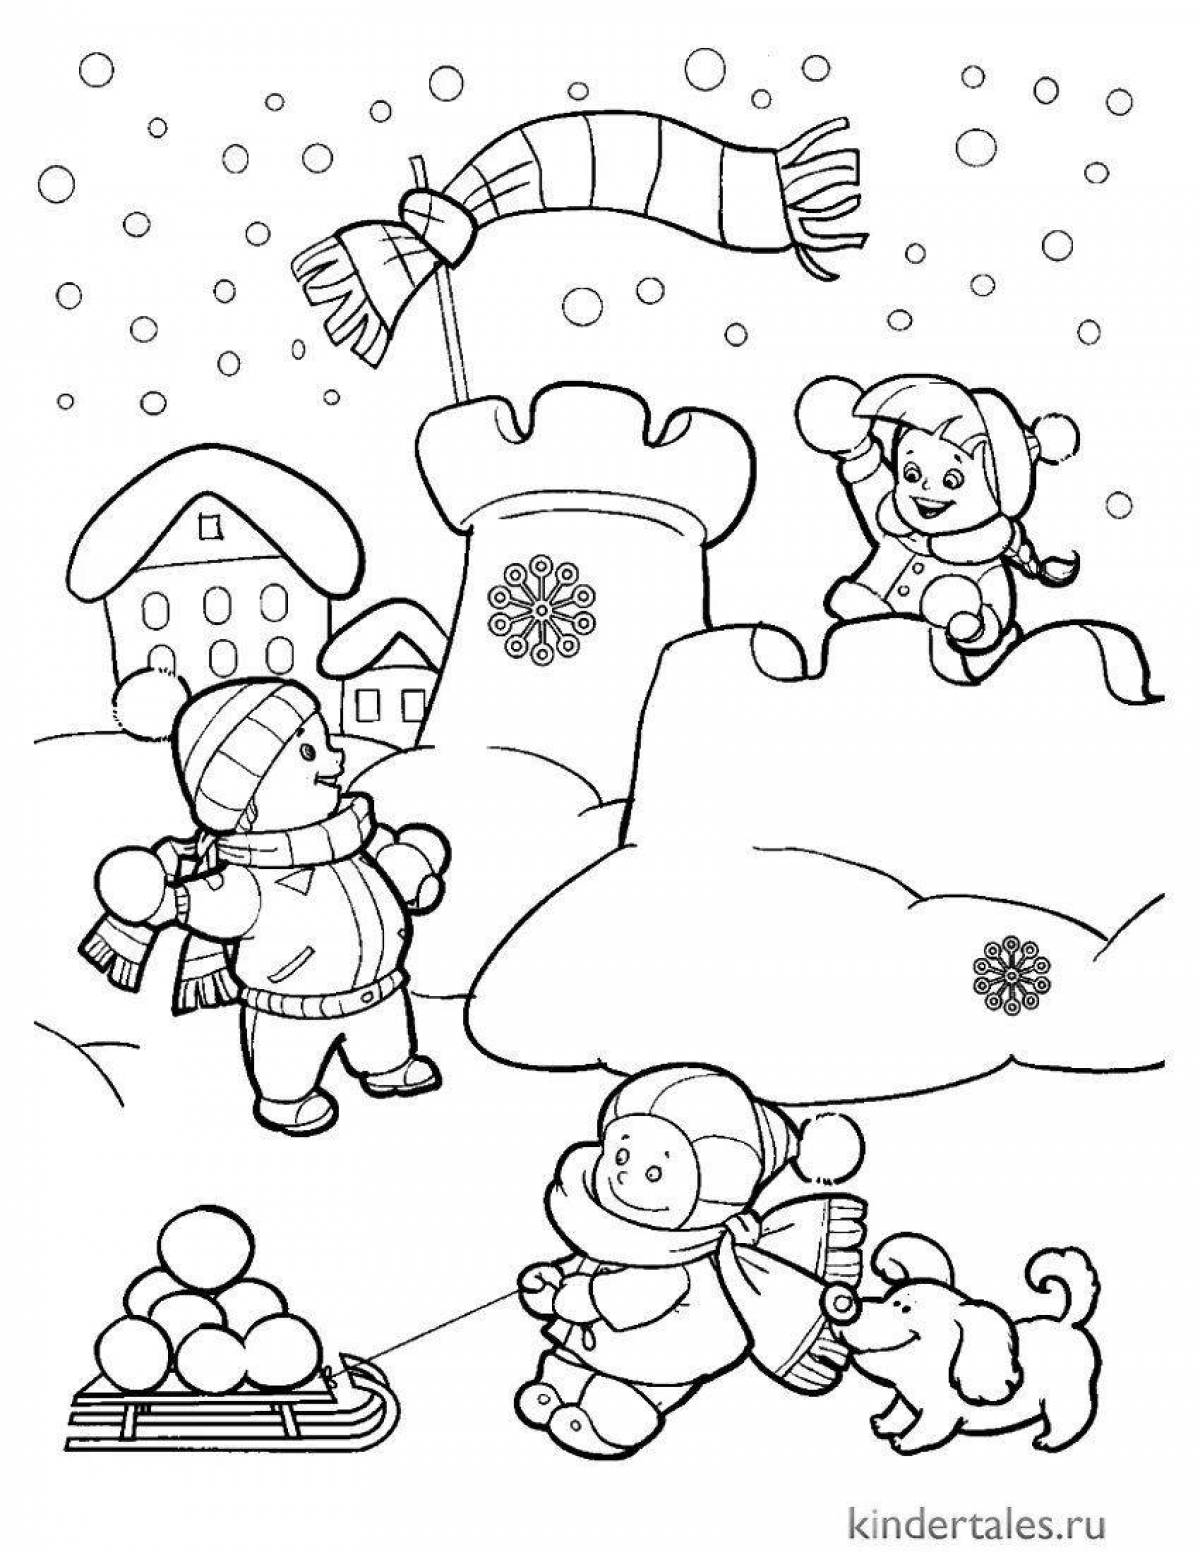 Colorful snowball fight coloring page for kids